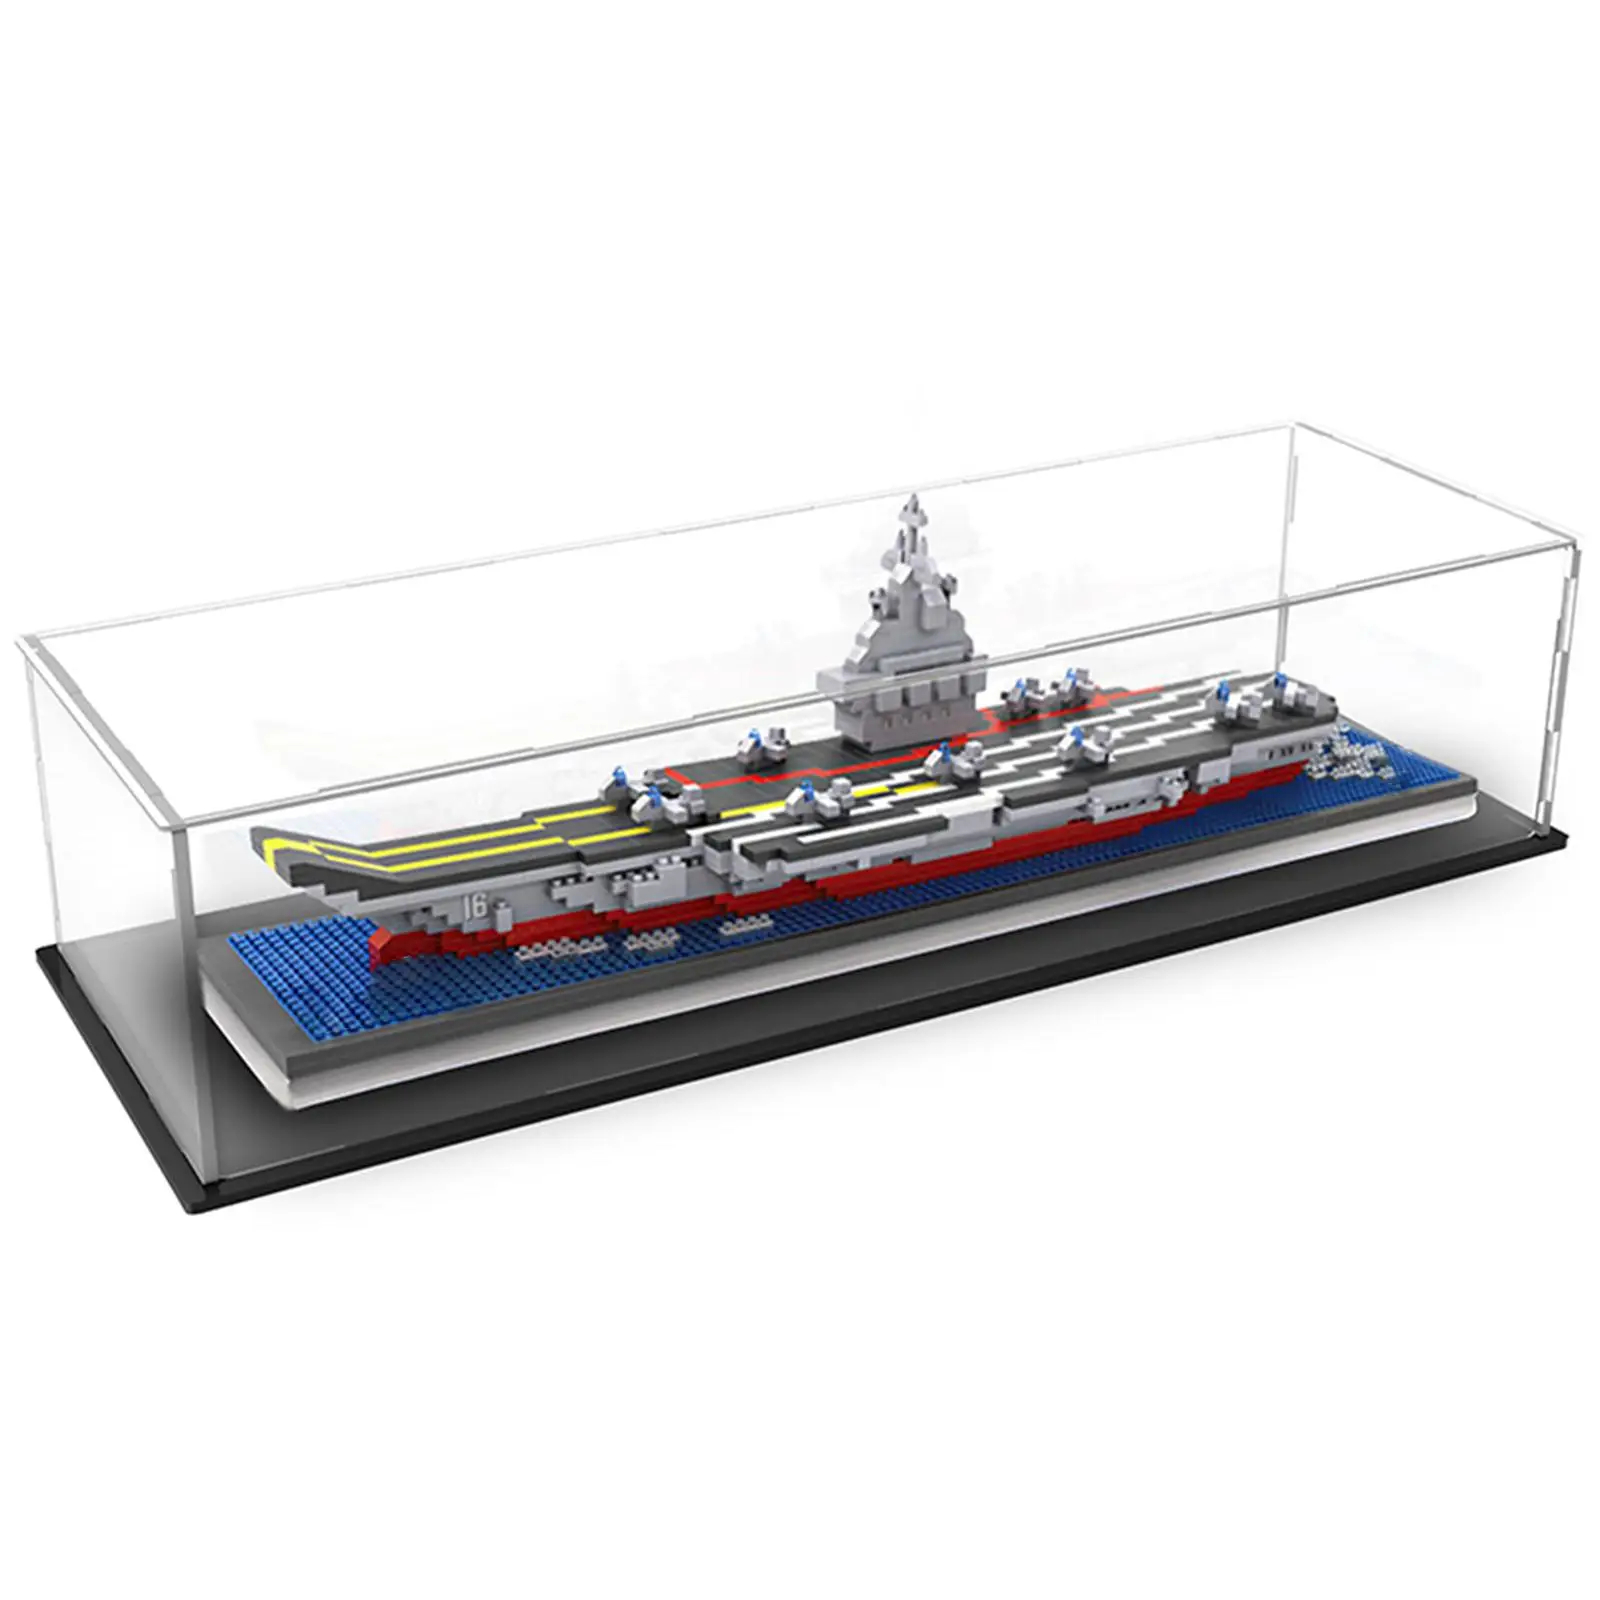 Acrylic Display Case Action Figures Display for Car Model Souvenirs Models